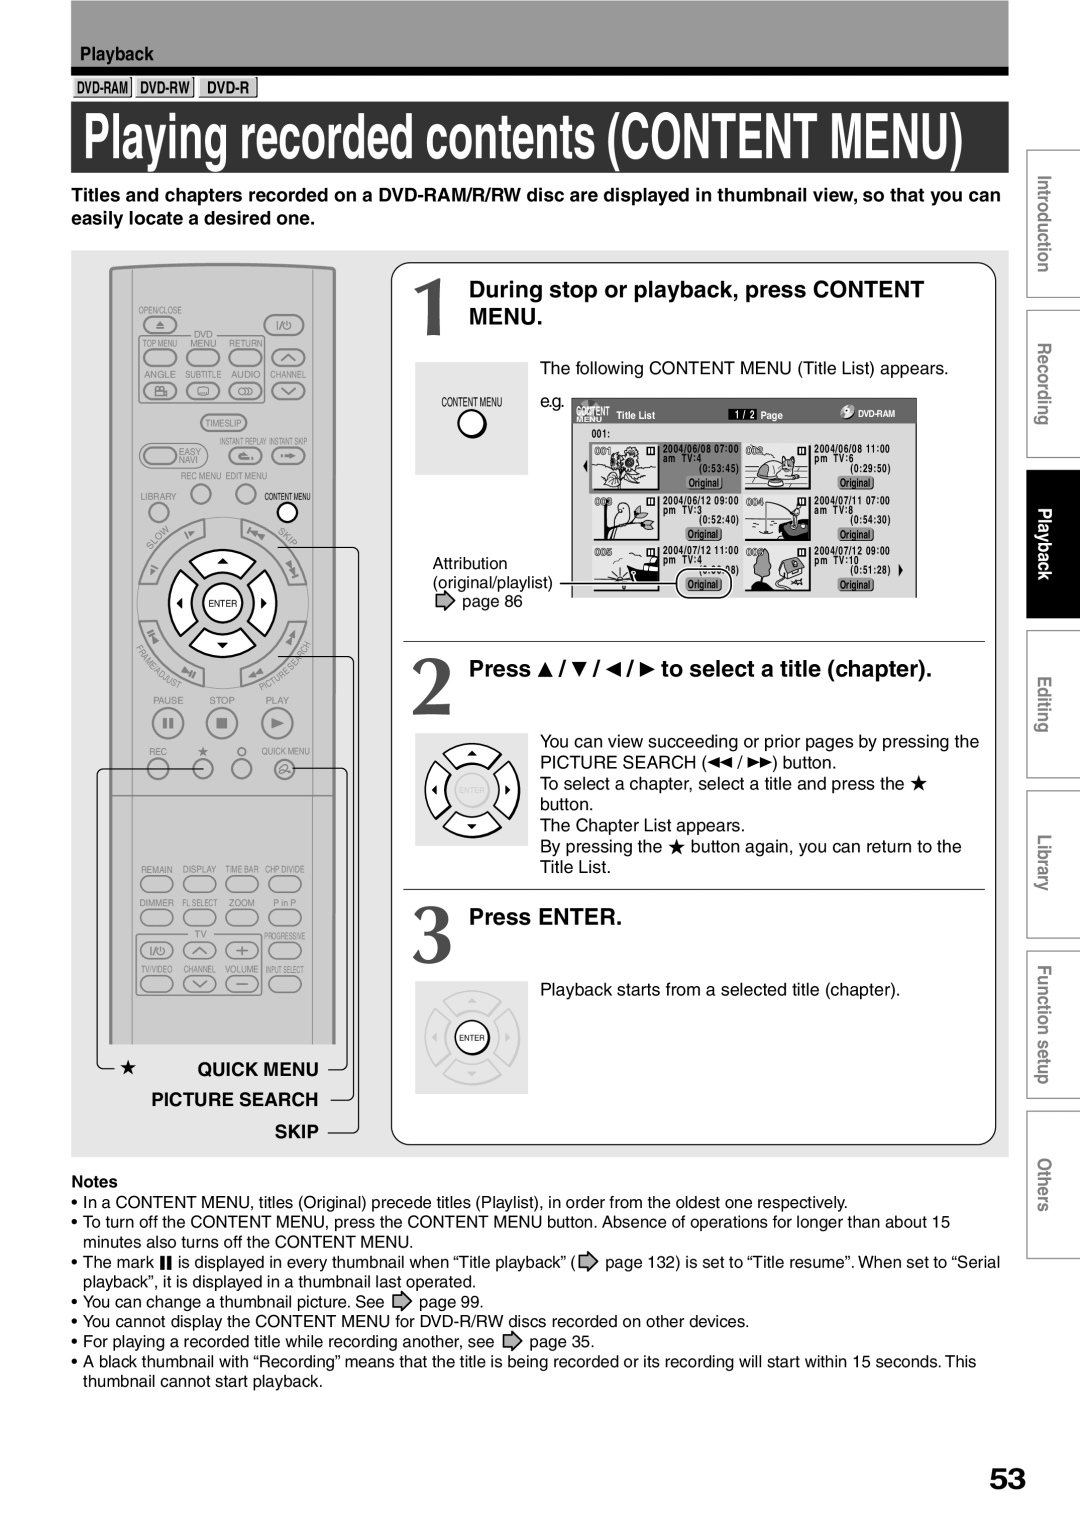 Toshiba D-KR2SU, D-R2SU During stop or playback, press CONTENT MENU, Press / / / to select a title chapter, Picture Search 